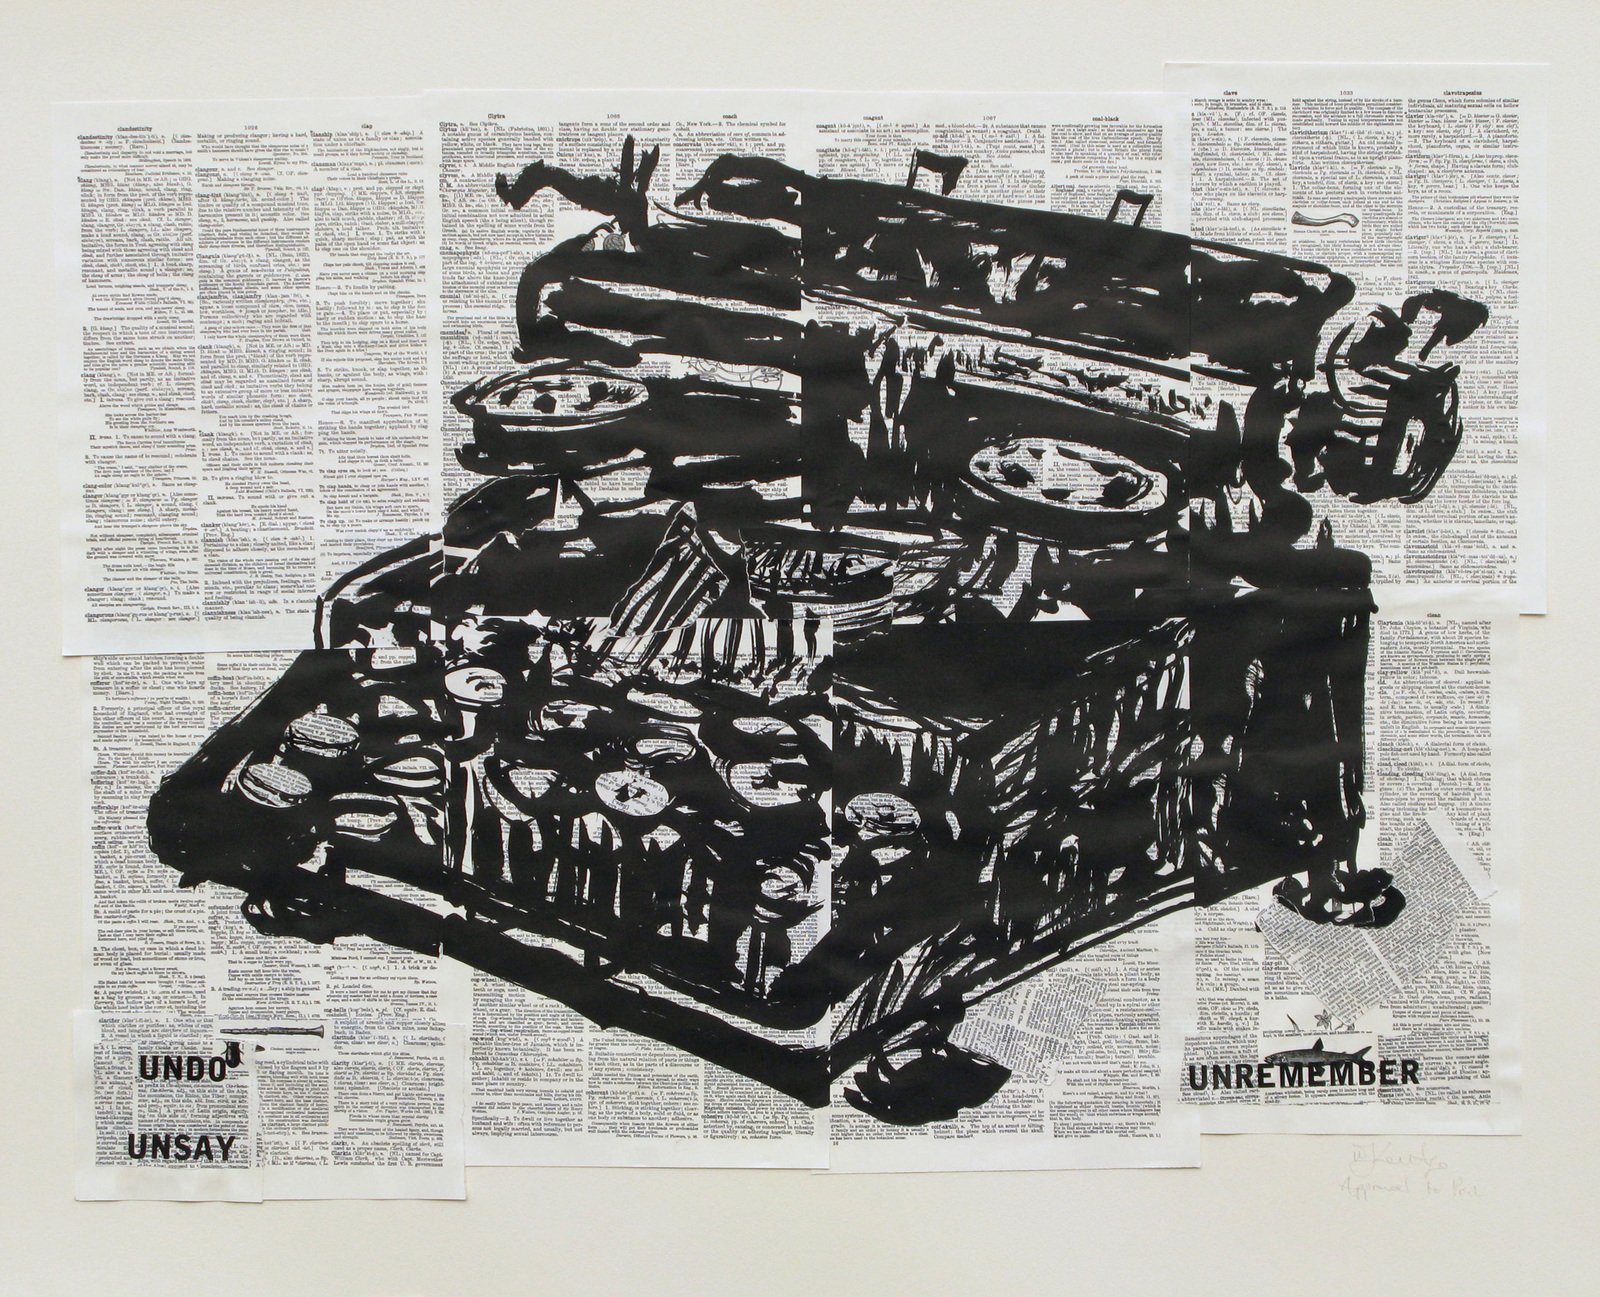 William Kentridge. A UNIVERSAL ARCHIVE, 2012. One run hand printed lithograph and collage. 28 x 33.75 inches. Greg Kucera Gallery. Seatle, Washington, USA.